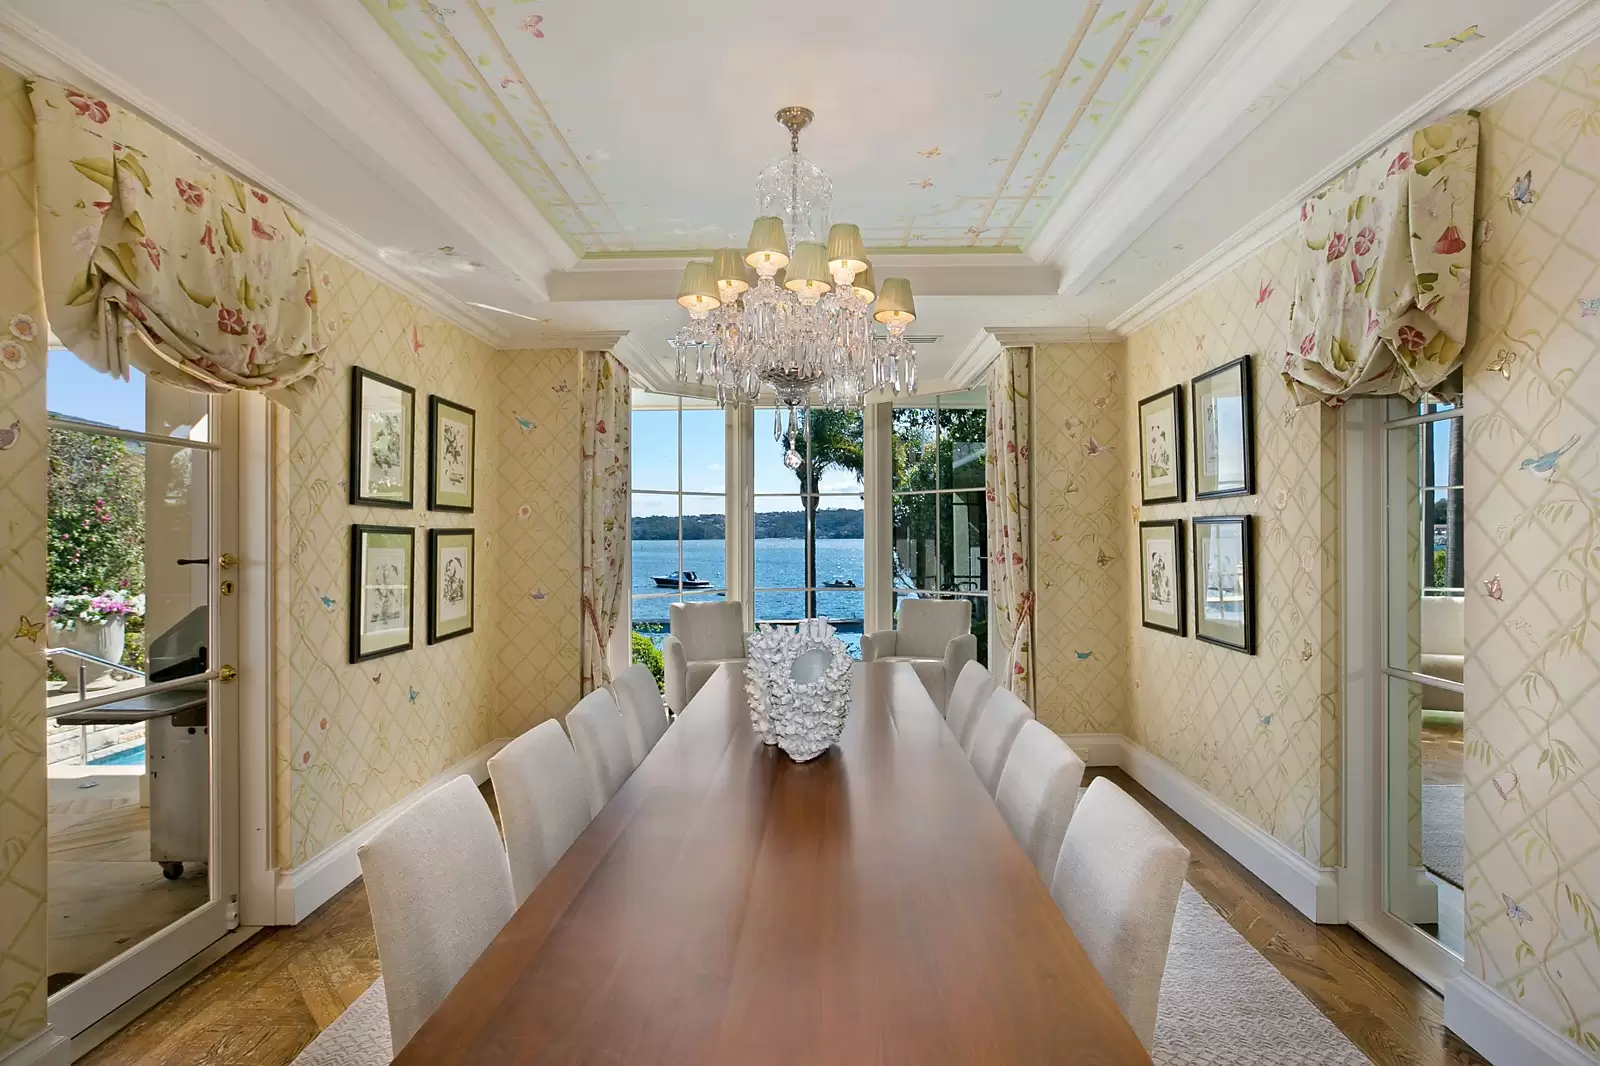 Photo #4: 34 The Crescent, Vaucluse - Sold by Sydney Sotheby's International Realty